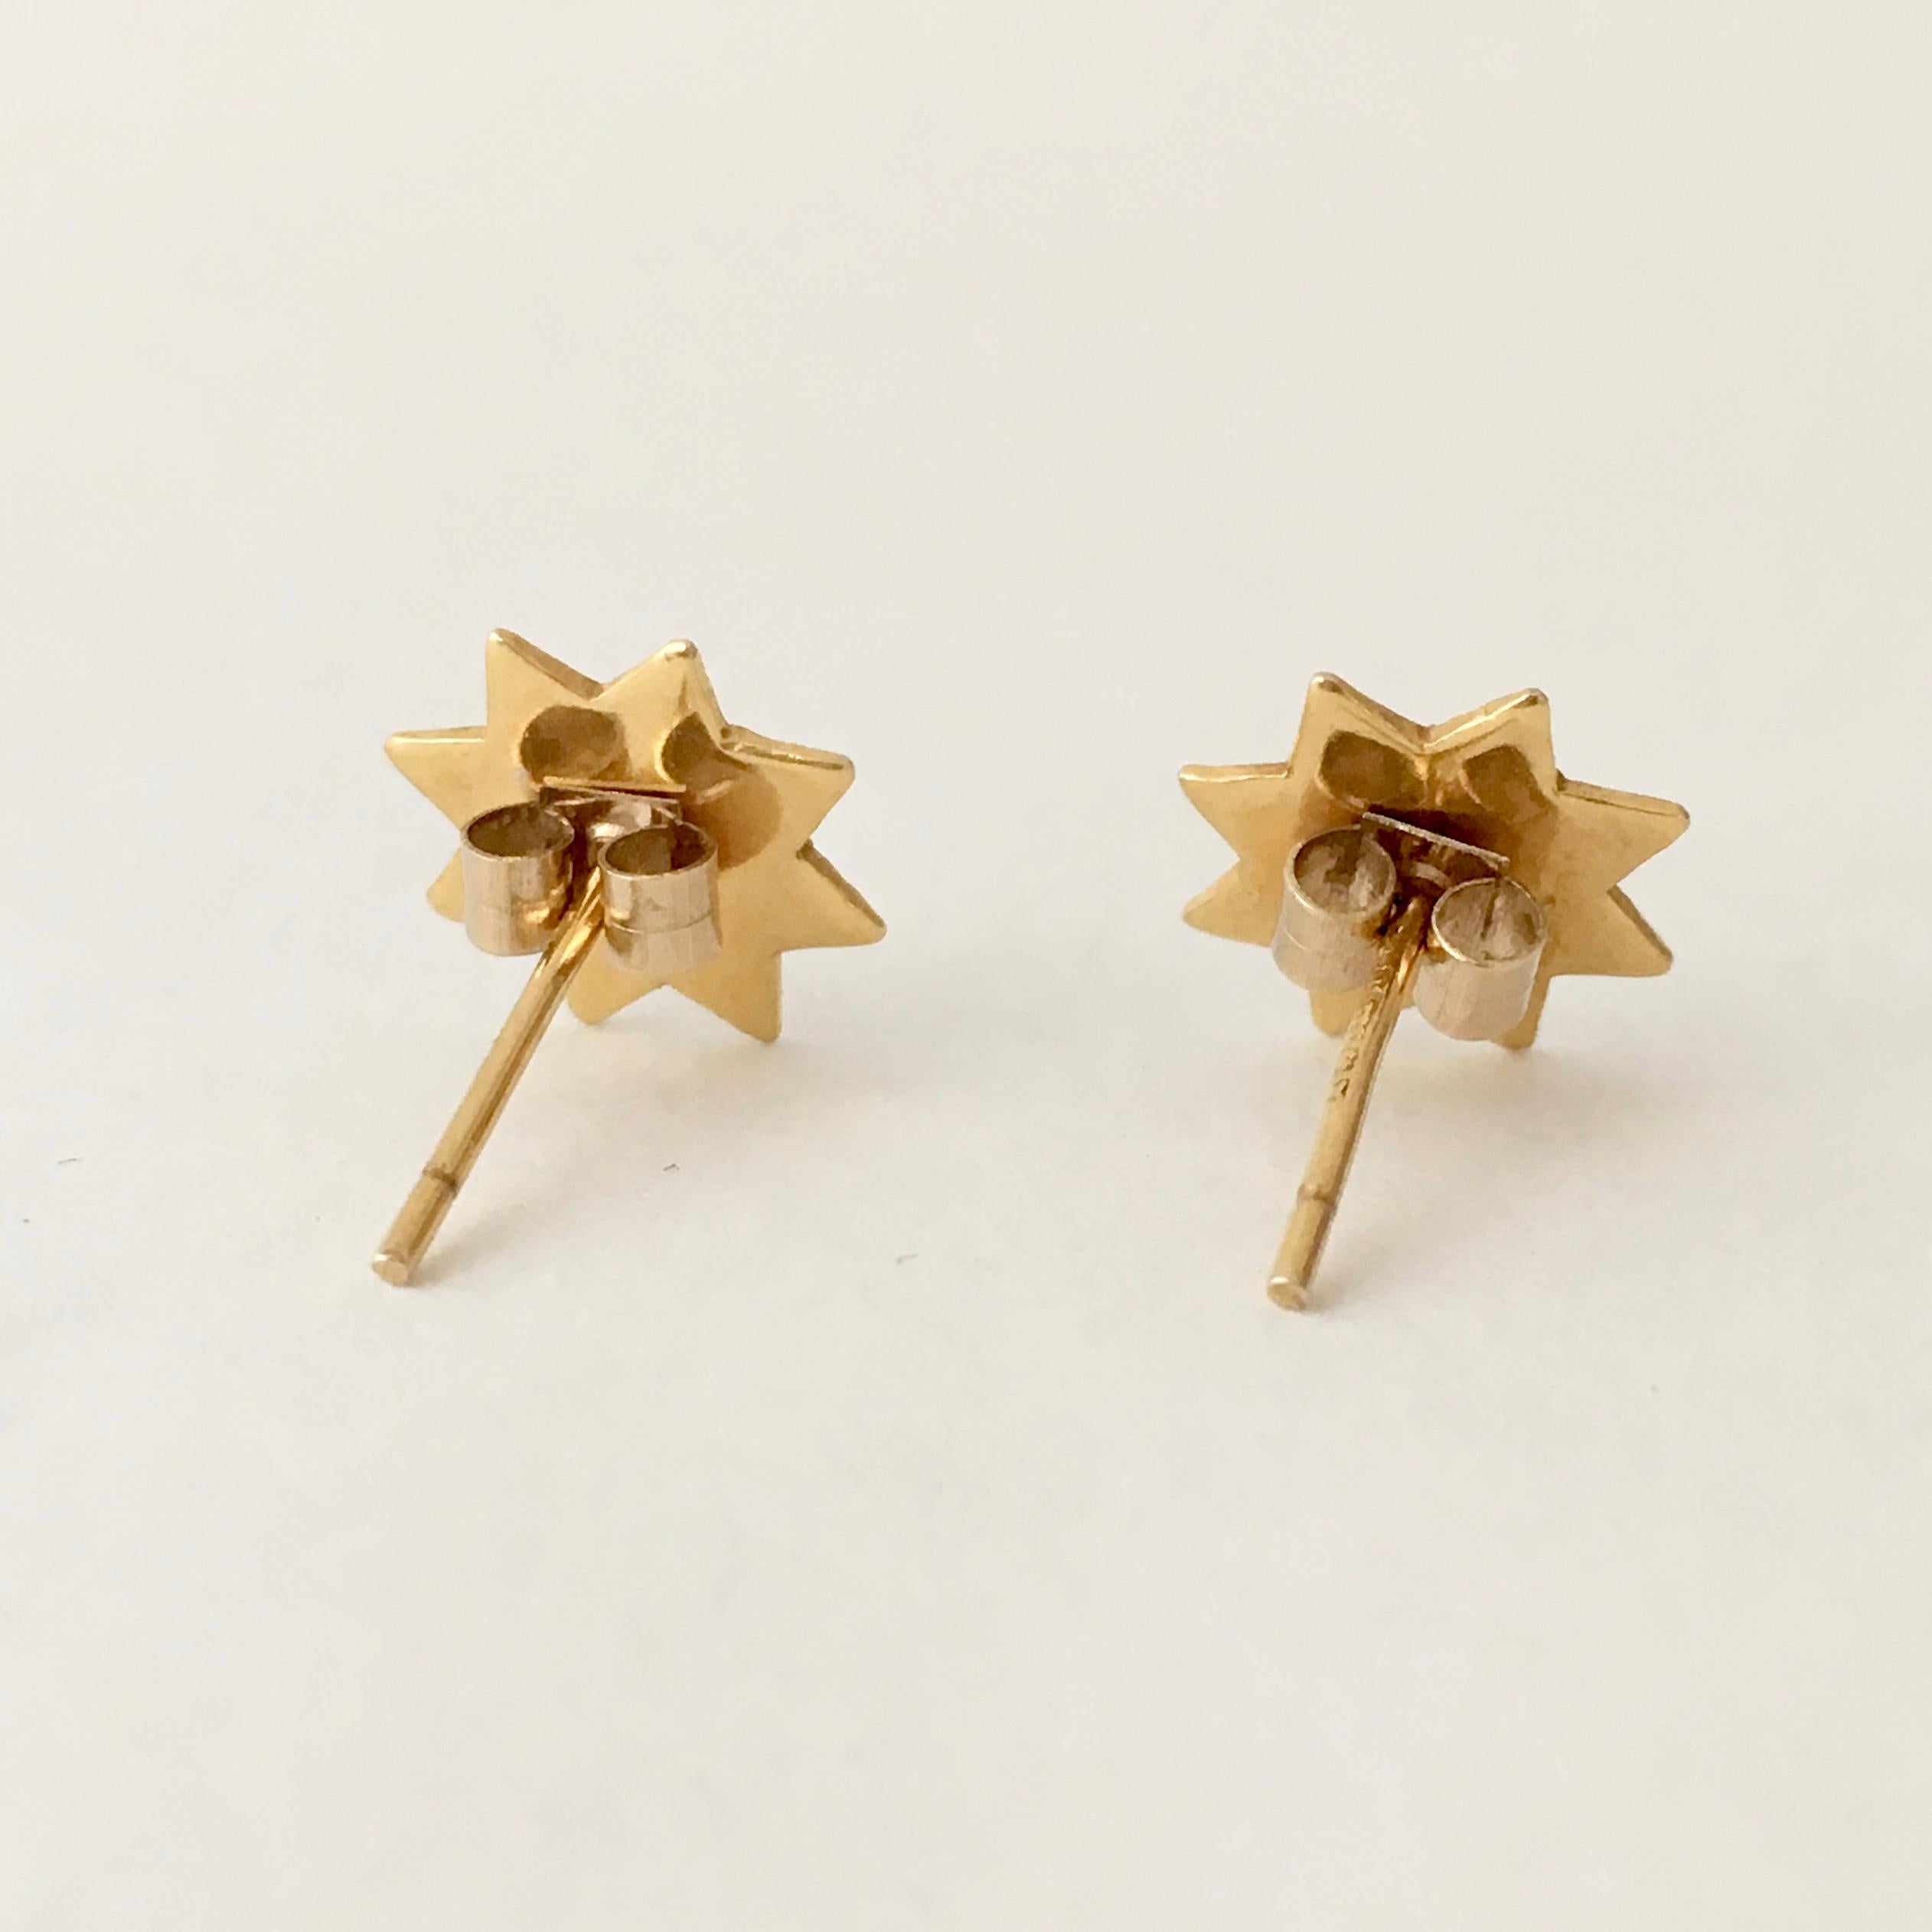 These vintage eight-point 9ct gold star earrings are small but perfectly formed, They are just the right size to sit neatly on your earlobe. The faceting adds interest and texture, making them twinkle in the light. 

Each star is 1cm by 1cm with a